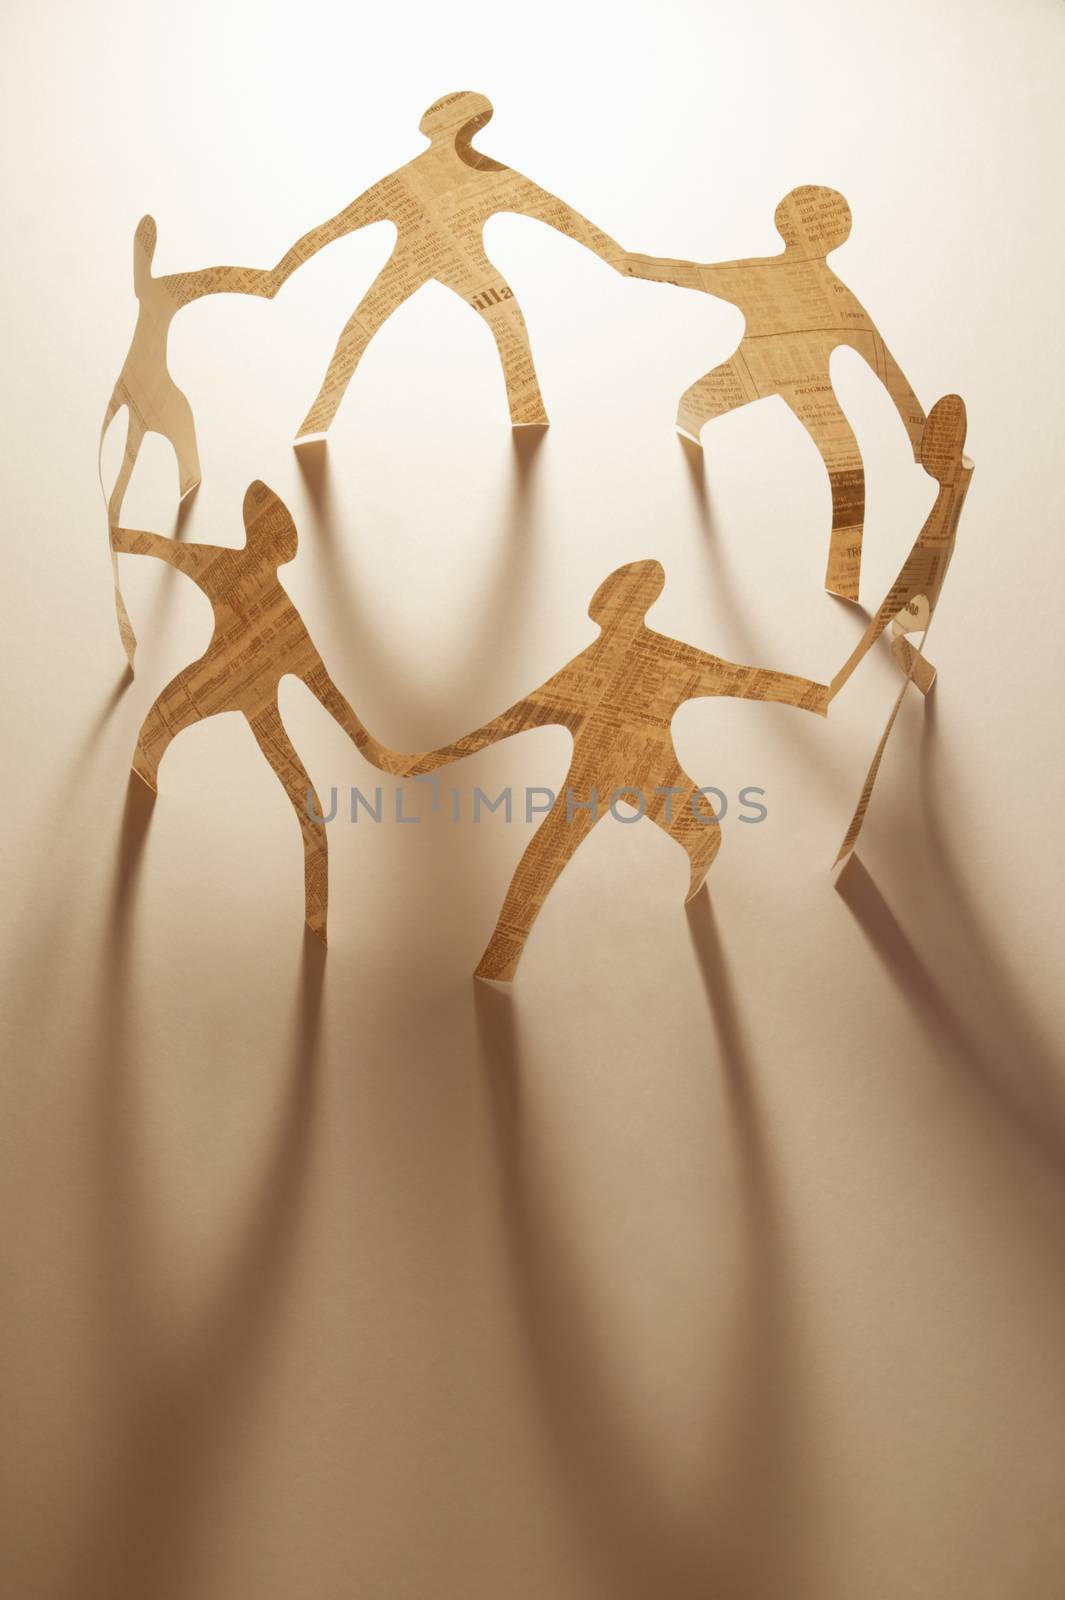 Paper dolls holding hands by conceptualmotion